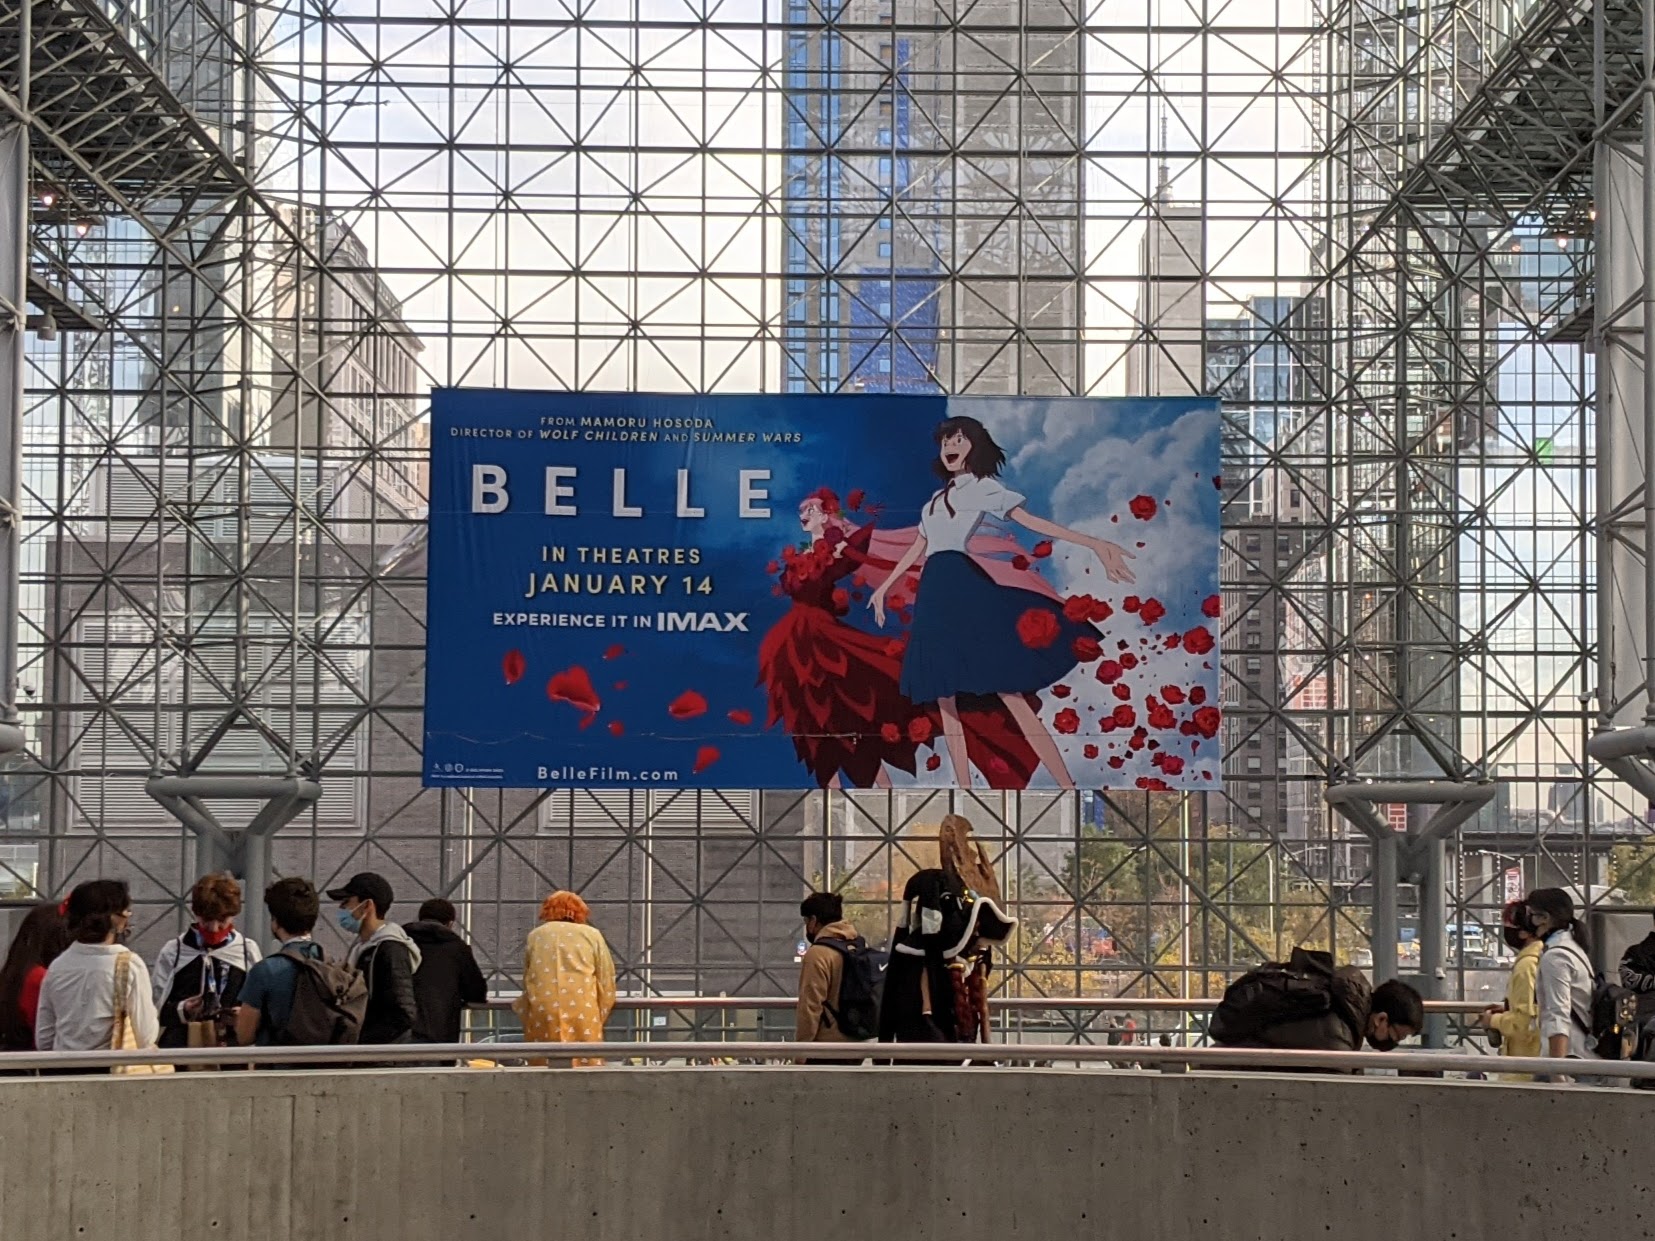 A giant poster promoting Belle.